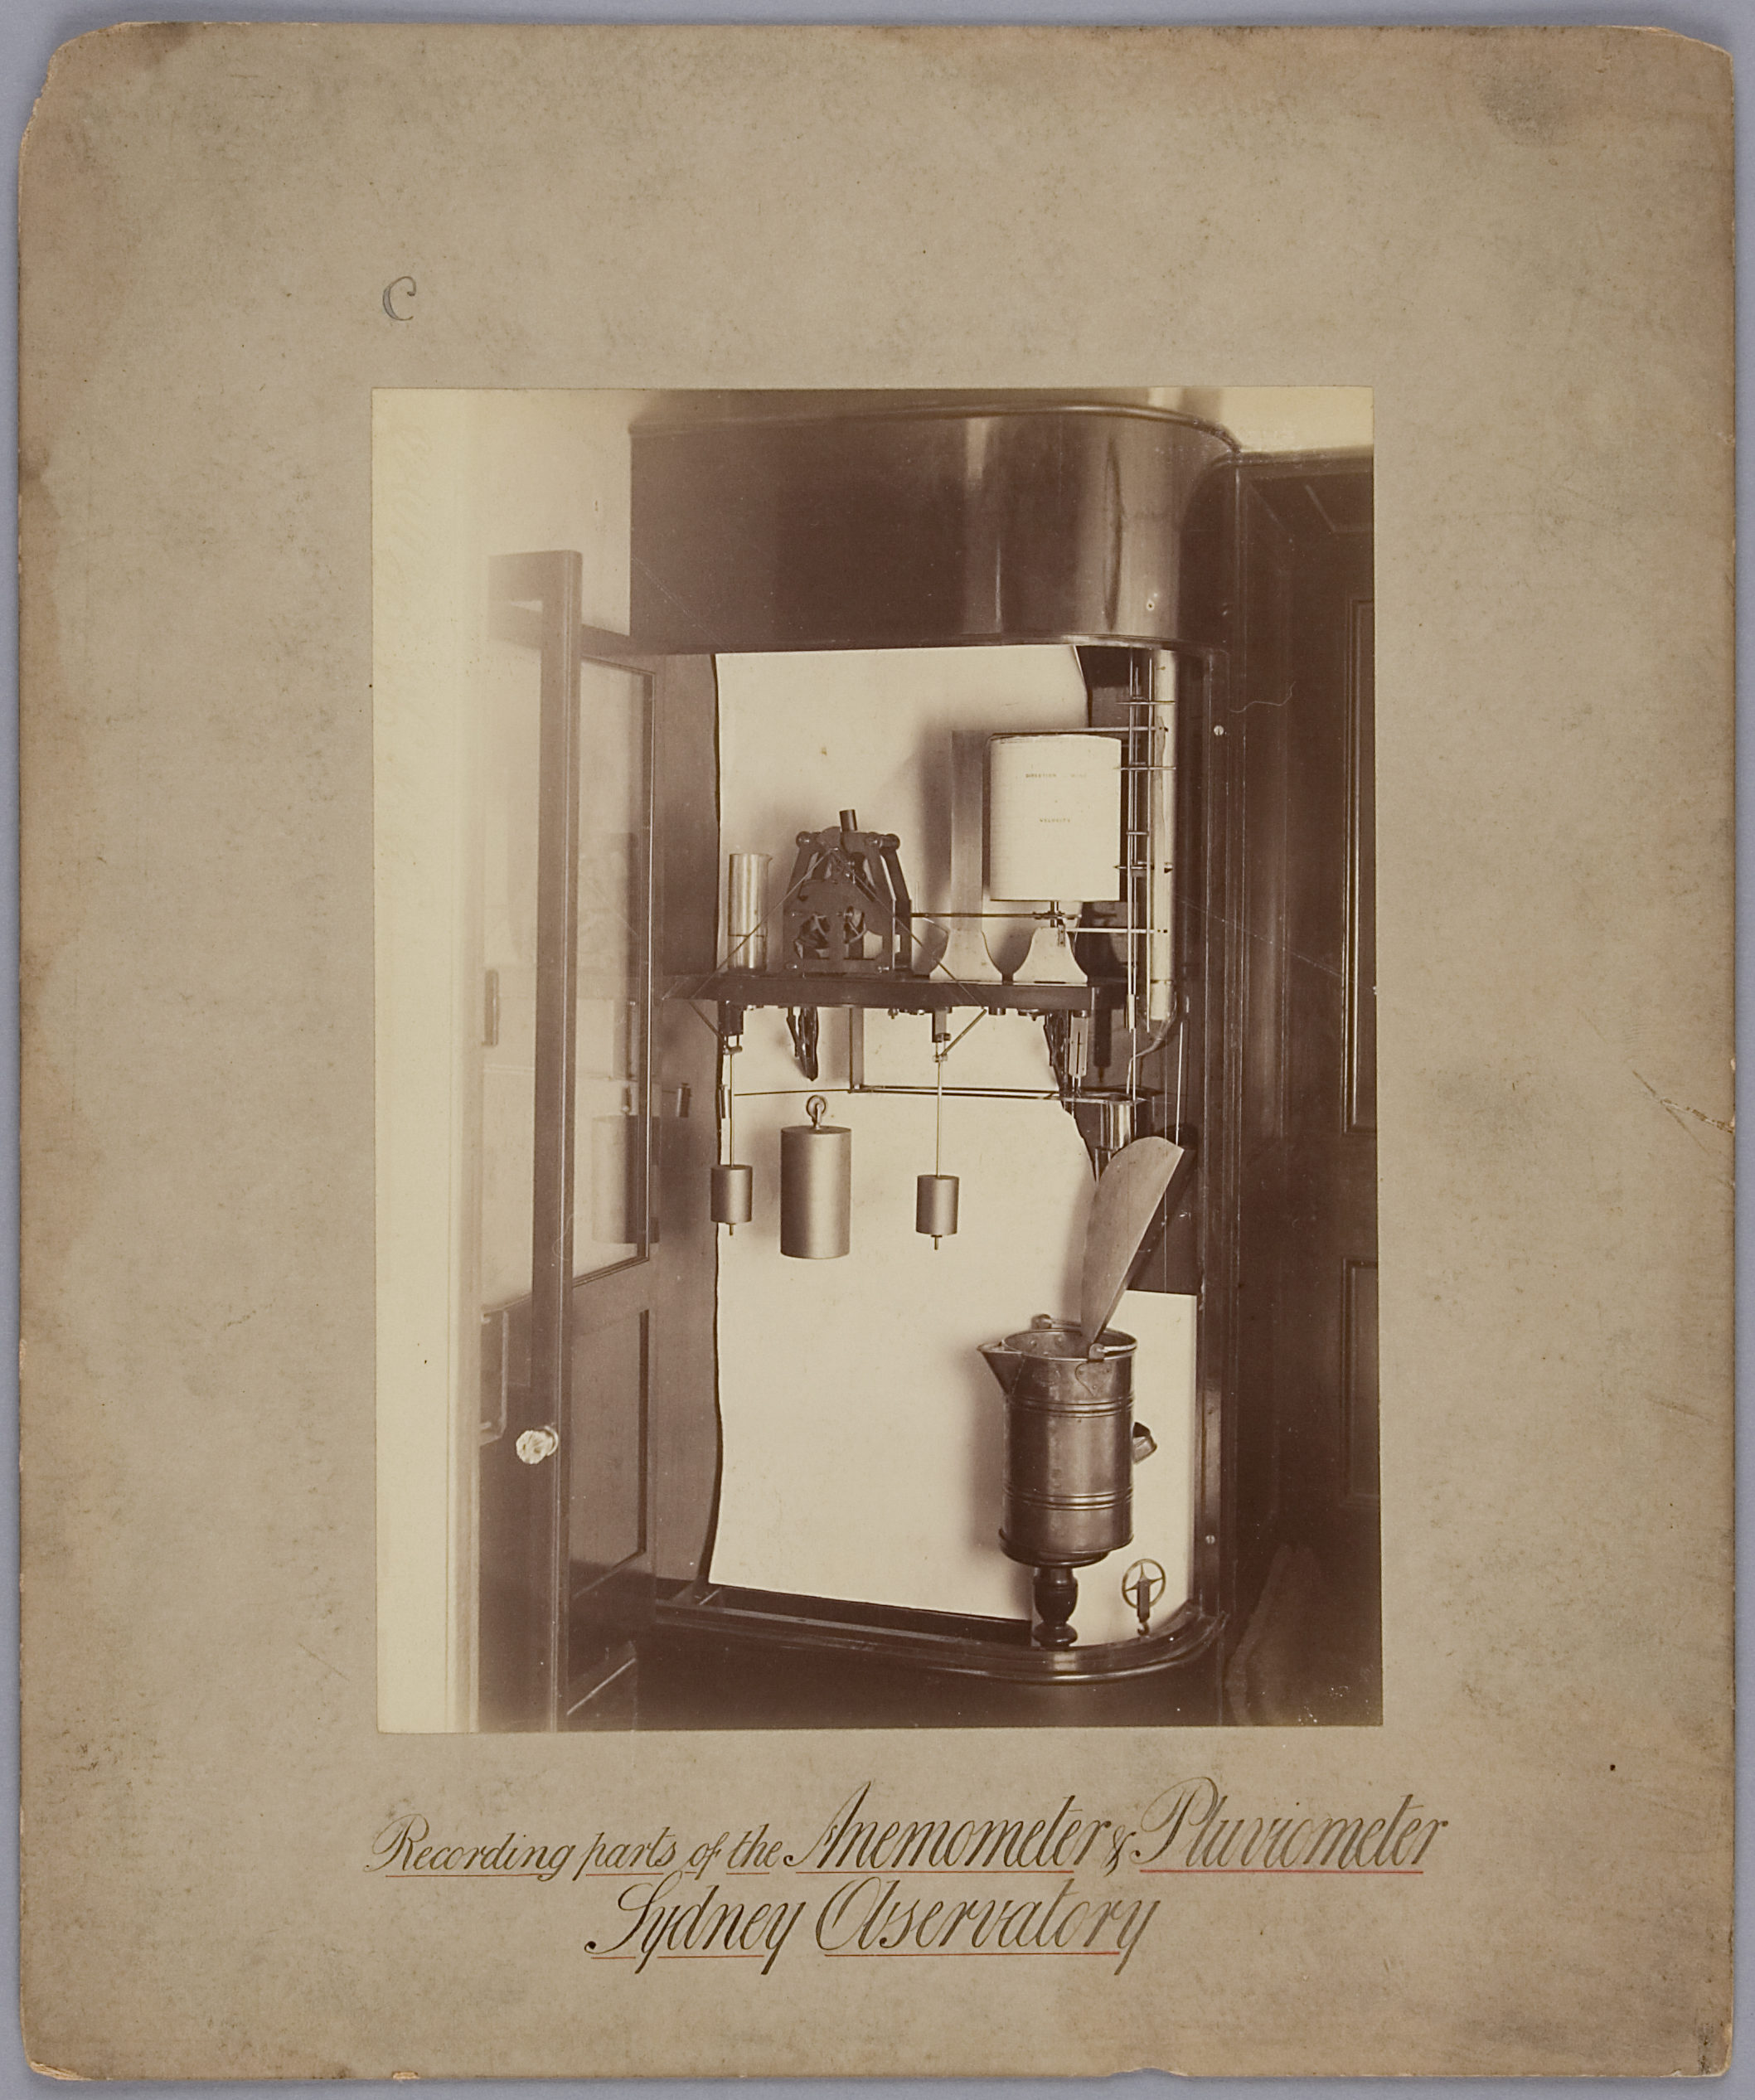 Sepia-toned photograph mounted on an aged piece of paper. The photograph depicts complex measuring machine, approximately as tall as a person, with various weights, pulleys, a water-collecting container and a rolled measurement chart.